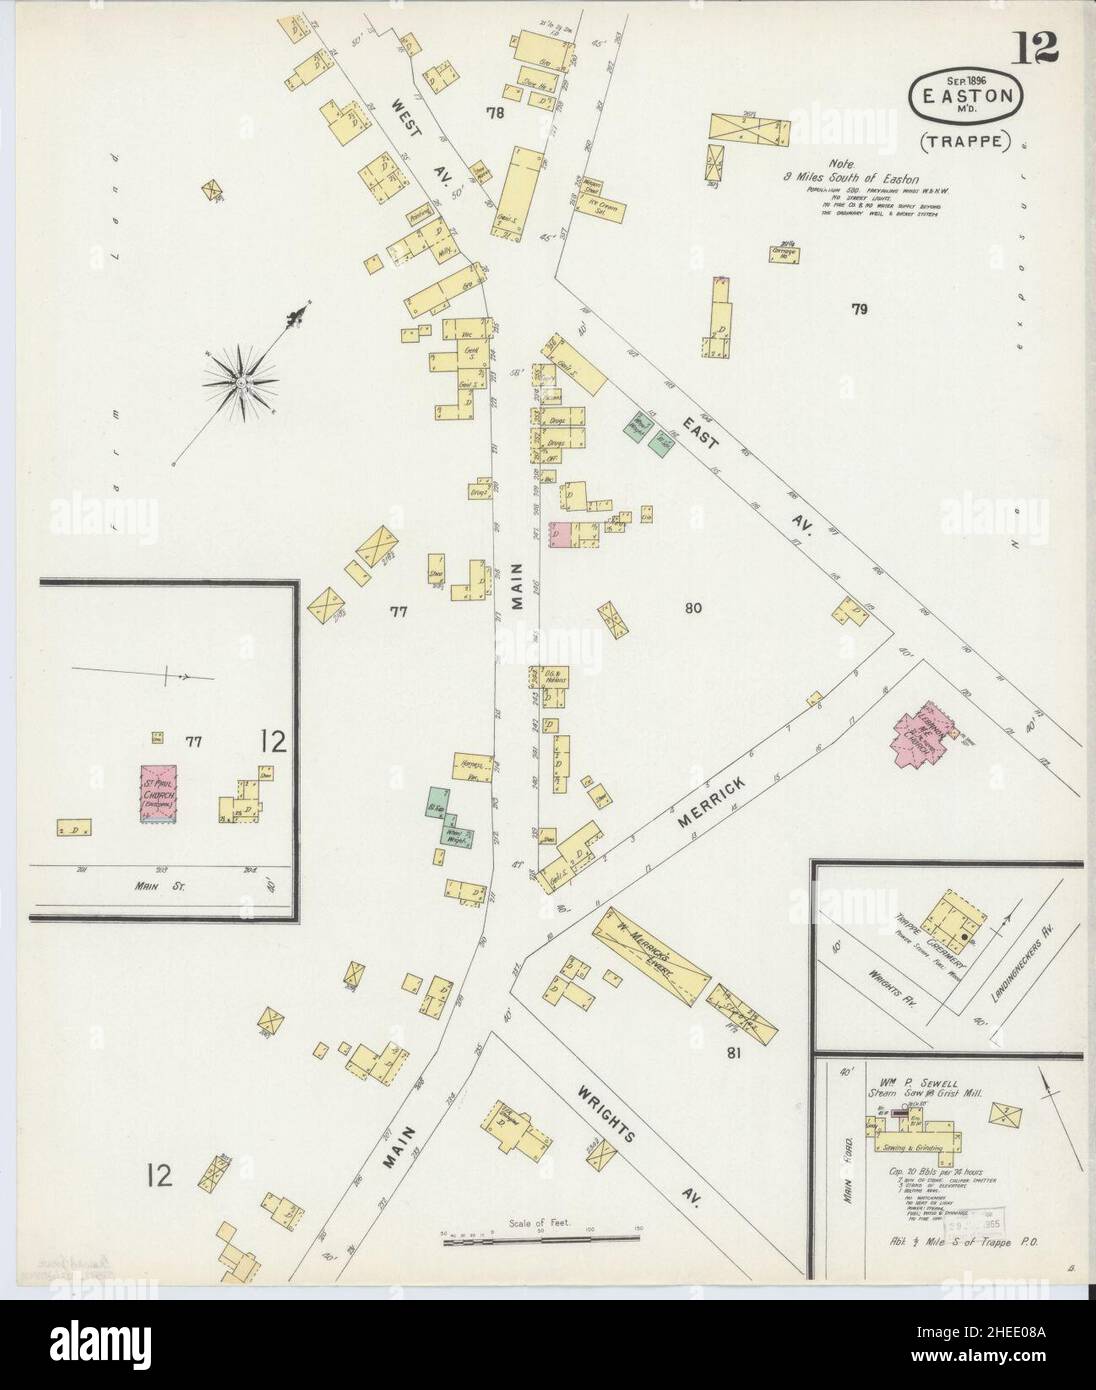 Sanborn Fire Insurance Map from Easton, Talbot County, Maryland. Stock Photo